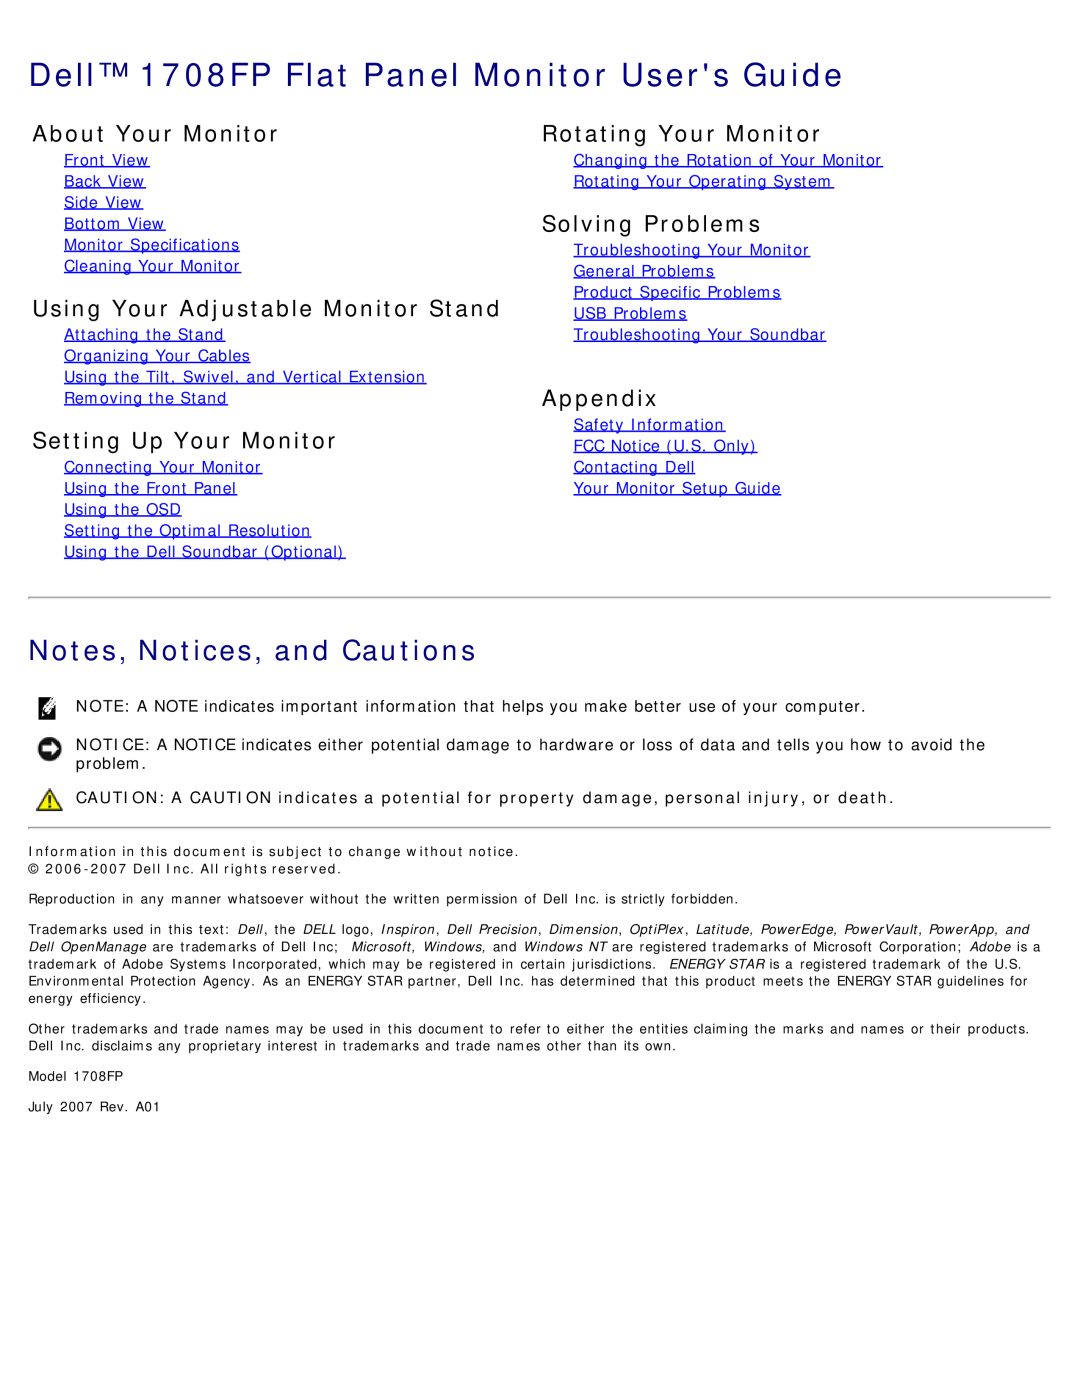 Dell appendix Dell 1708FP Flat Panel Monitor Users Guide, Notes, Notices, and Cautions, About Your Monitor, Appendix 